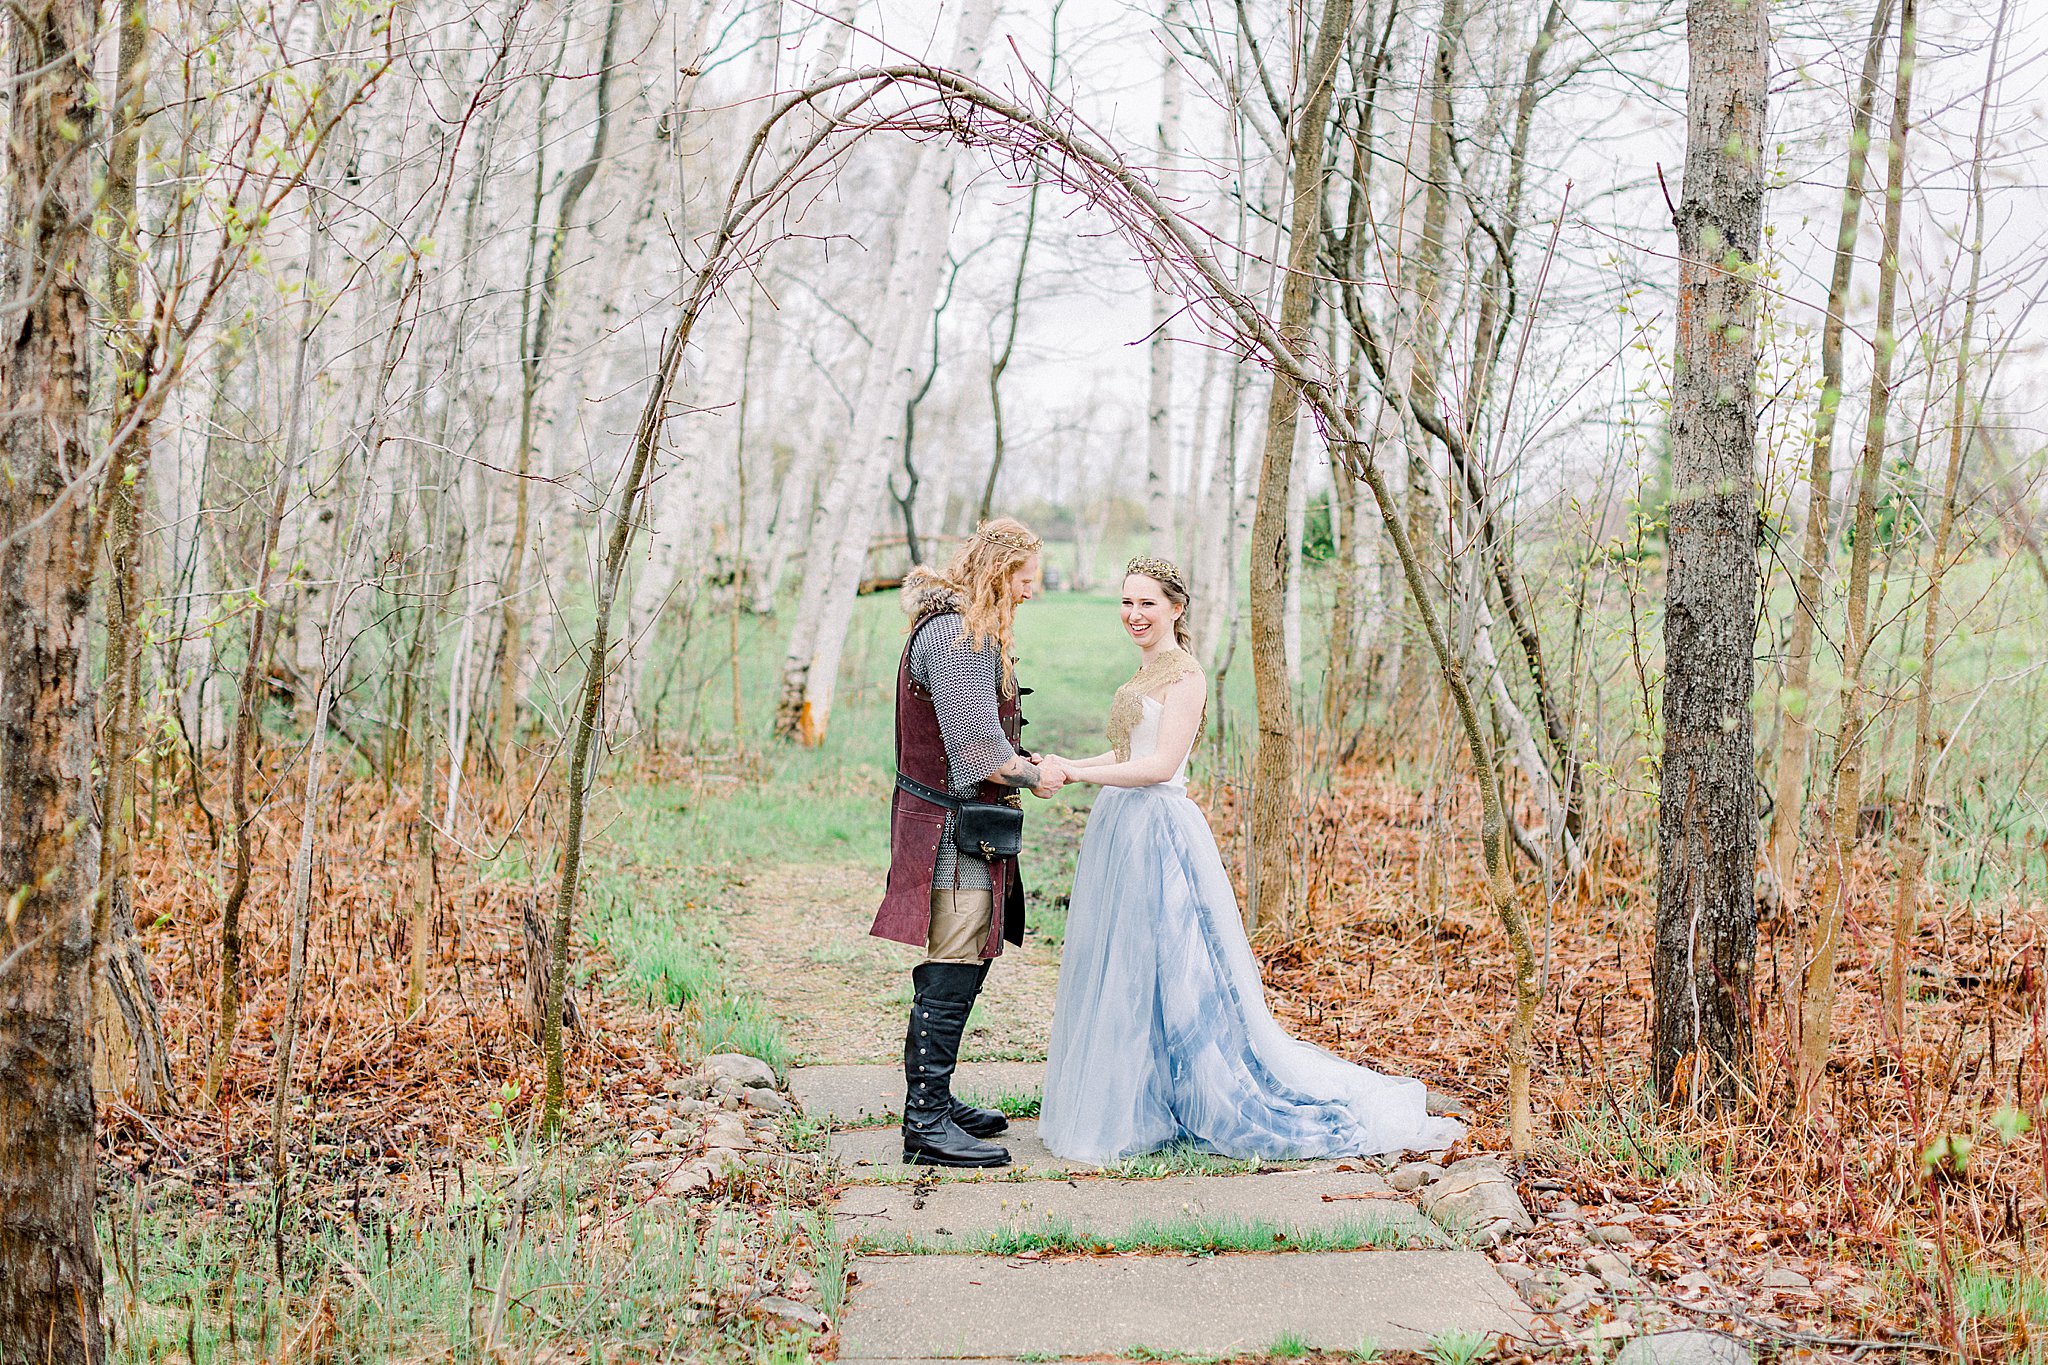 Bride and groom explore birch forest at Castle Farms wedding.